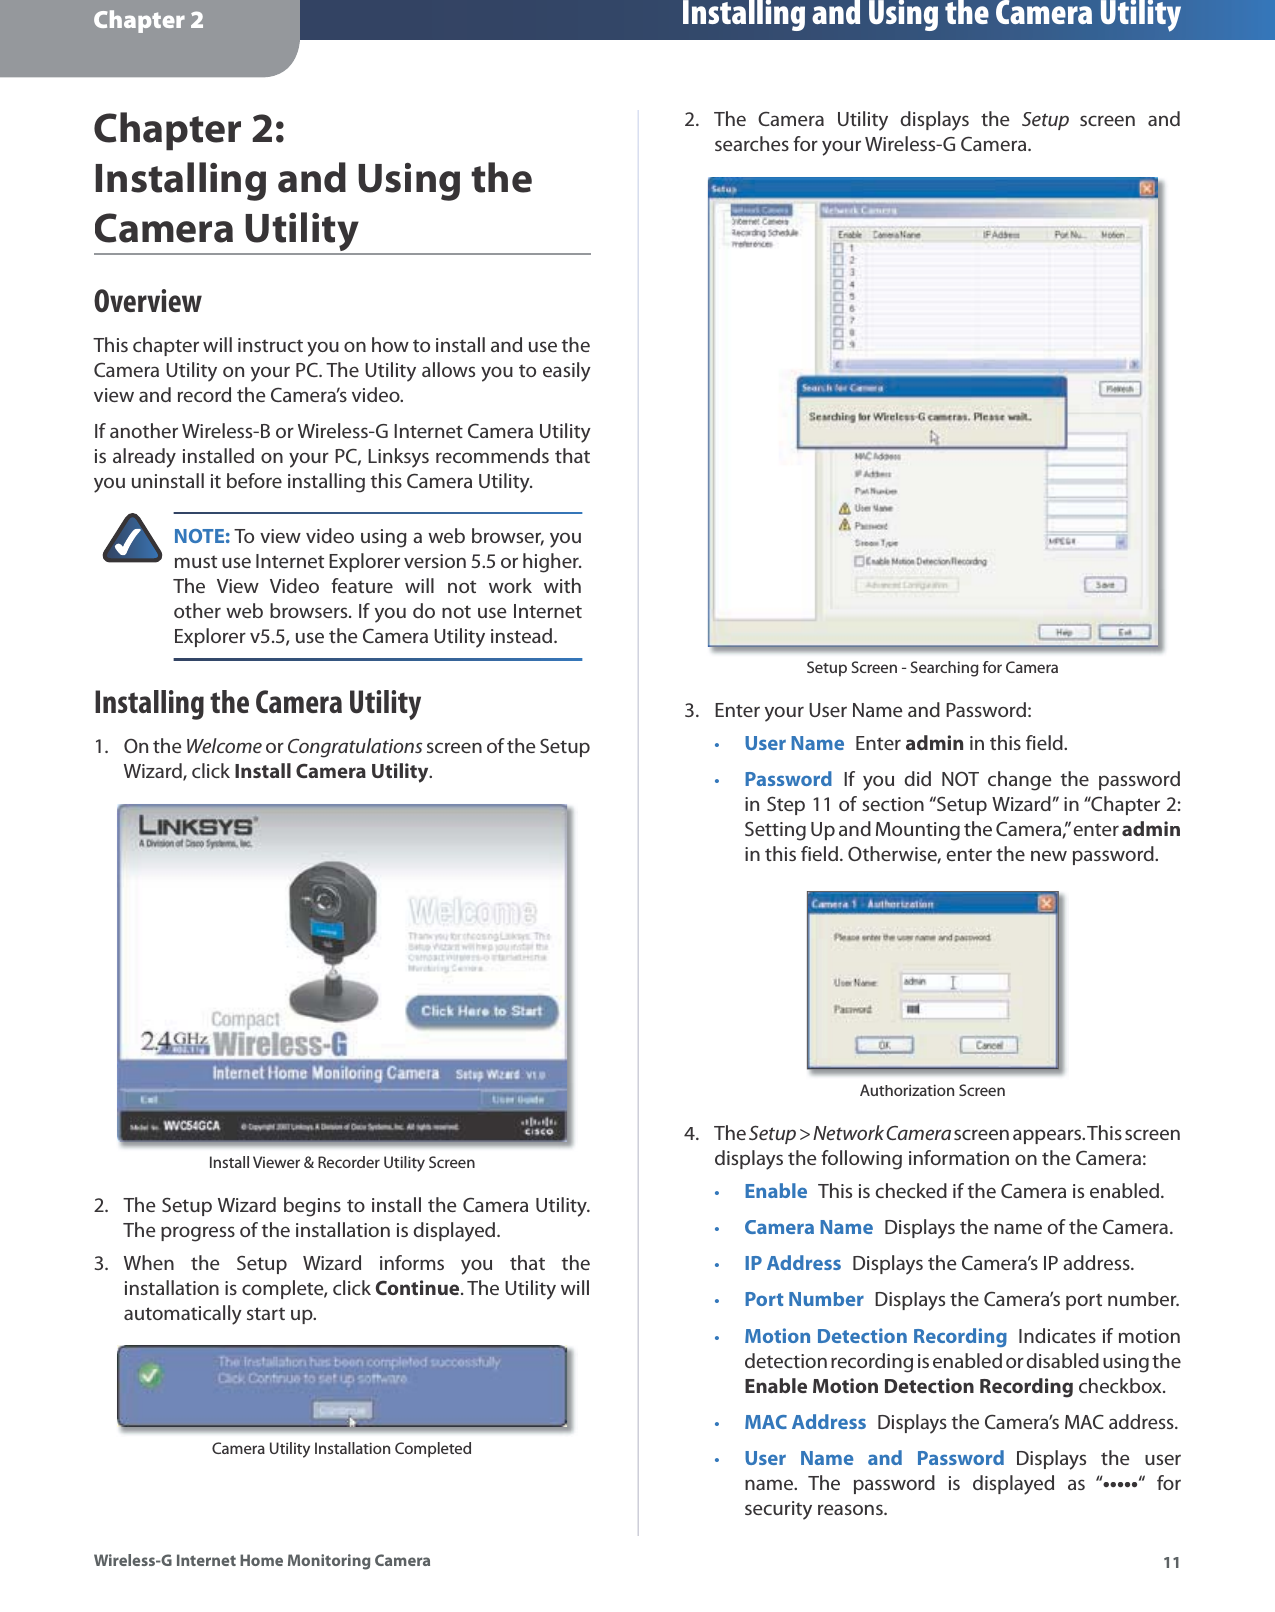 Chapter 2 Installing and Using the Camera Utility11Wireless-G Internet Home Monitoring CameraChapter 2:Installing and Using theCamera UtilityOverviewThis chapter will instruct you on how to install and use the Camera Utility on your PC. The Utility allows you to easily view and record the Camera’s video.If another Wireless-B or Wireless-G Internet Camera Utility is already installed on your PC, Linksys recommends that you uninstall it before installing this Camera Utility.NOTE: To view video using a web browser, you must use Internet Explorer version 5.5 or higher. The View Video feature will not work withother web browsers. If you do not use InternetExplorer v5.5, use the Camera Utility instead.Installing the Camera UtilityOn theWelcome orCongratulations screen of the SetupWizard, click Install Camera Utility.Install Viewer &amp; Recorder Utility ScreenThe Setup Wizard begins to install the Camera Utility. The progress of the installation is displayed.When the Setup Wizard informs you that theinstallation is complete, click Continue. The Utility willautomatically start up.Camera Utility Installation Completed1.2.3.The Camera Utility displays the Setup screen and searches for your Wireless-G Camera.Setup Screen - Searching for CameraEnter your User Name and Password:User NameEnter admin in this field.PasswordIf you did NOT change the passwordin Step 11 of section “Setup Wizard” in “Chapter 2: Setting Up and Mounting the Camera,” enter adminin this field. Otherwise, enter the new password.Authorization ScreenTheSetup &gt; Network Camera screen appears. This screen displays the following information on the Camera:EnableThis is checked if the Camera is enabled.Camera Name Displays the name of the Camera.IP AddressDisplays the Camera’s IP address.Port NumberDisplays the Camera’s port number.Motion Detection RecordingIndicates if motion detection recording is enabled or disabled using the Enable Motion Detection Recording checkbox.MAC AddressDisplays the Camera’s MAC address.User Name and PasswordDisplays the username. The password is displayed as “•••••“ forsecurity reasons.2.3.••4.•••••••